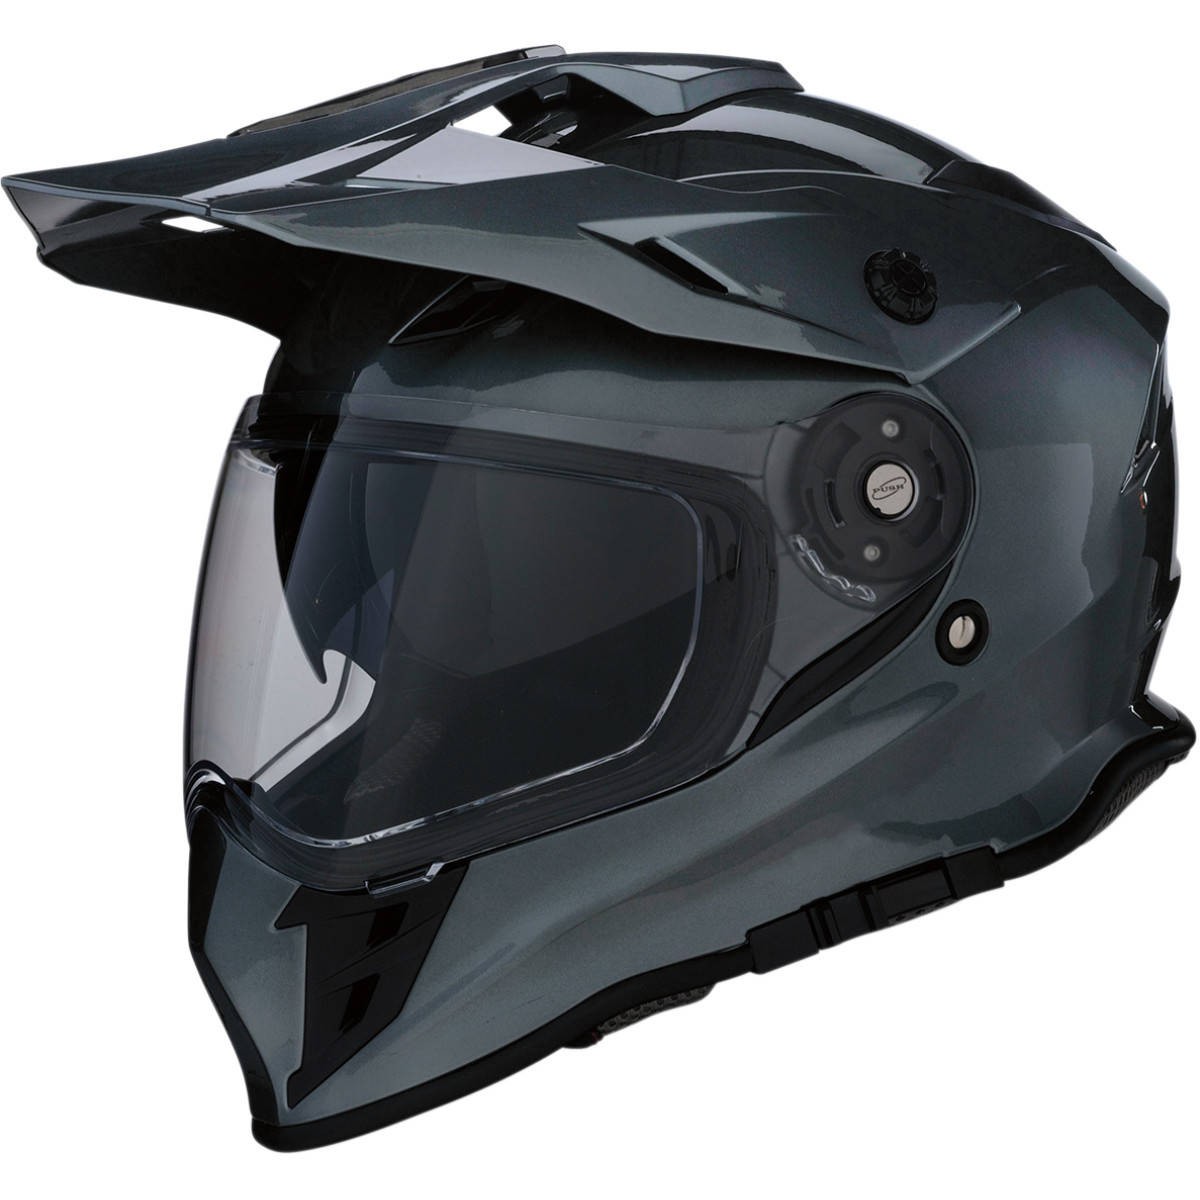 Phenomenal Photos Of dual sport motorcycle helmets Pictures